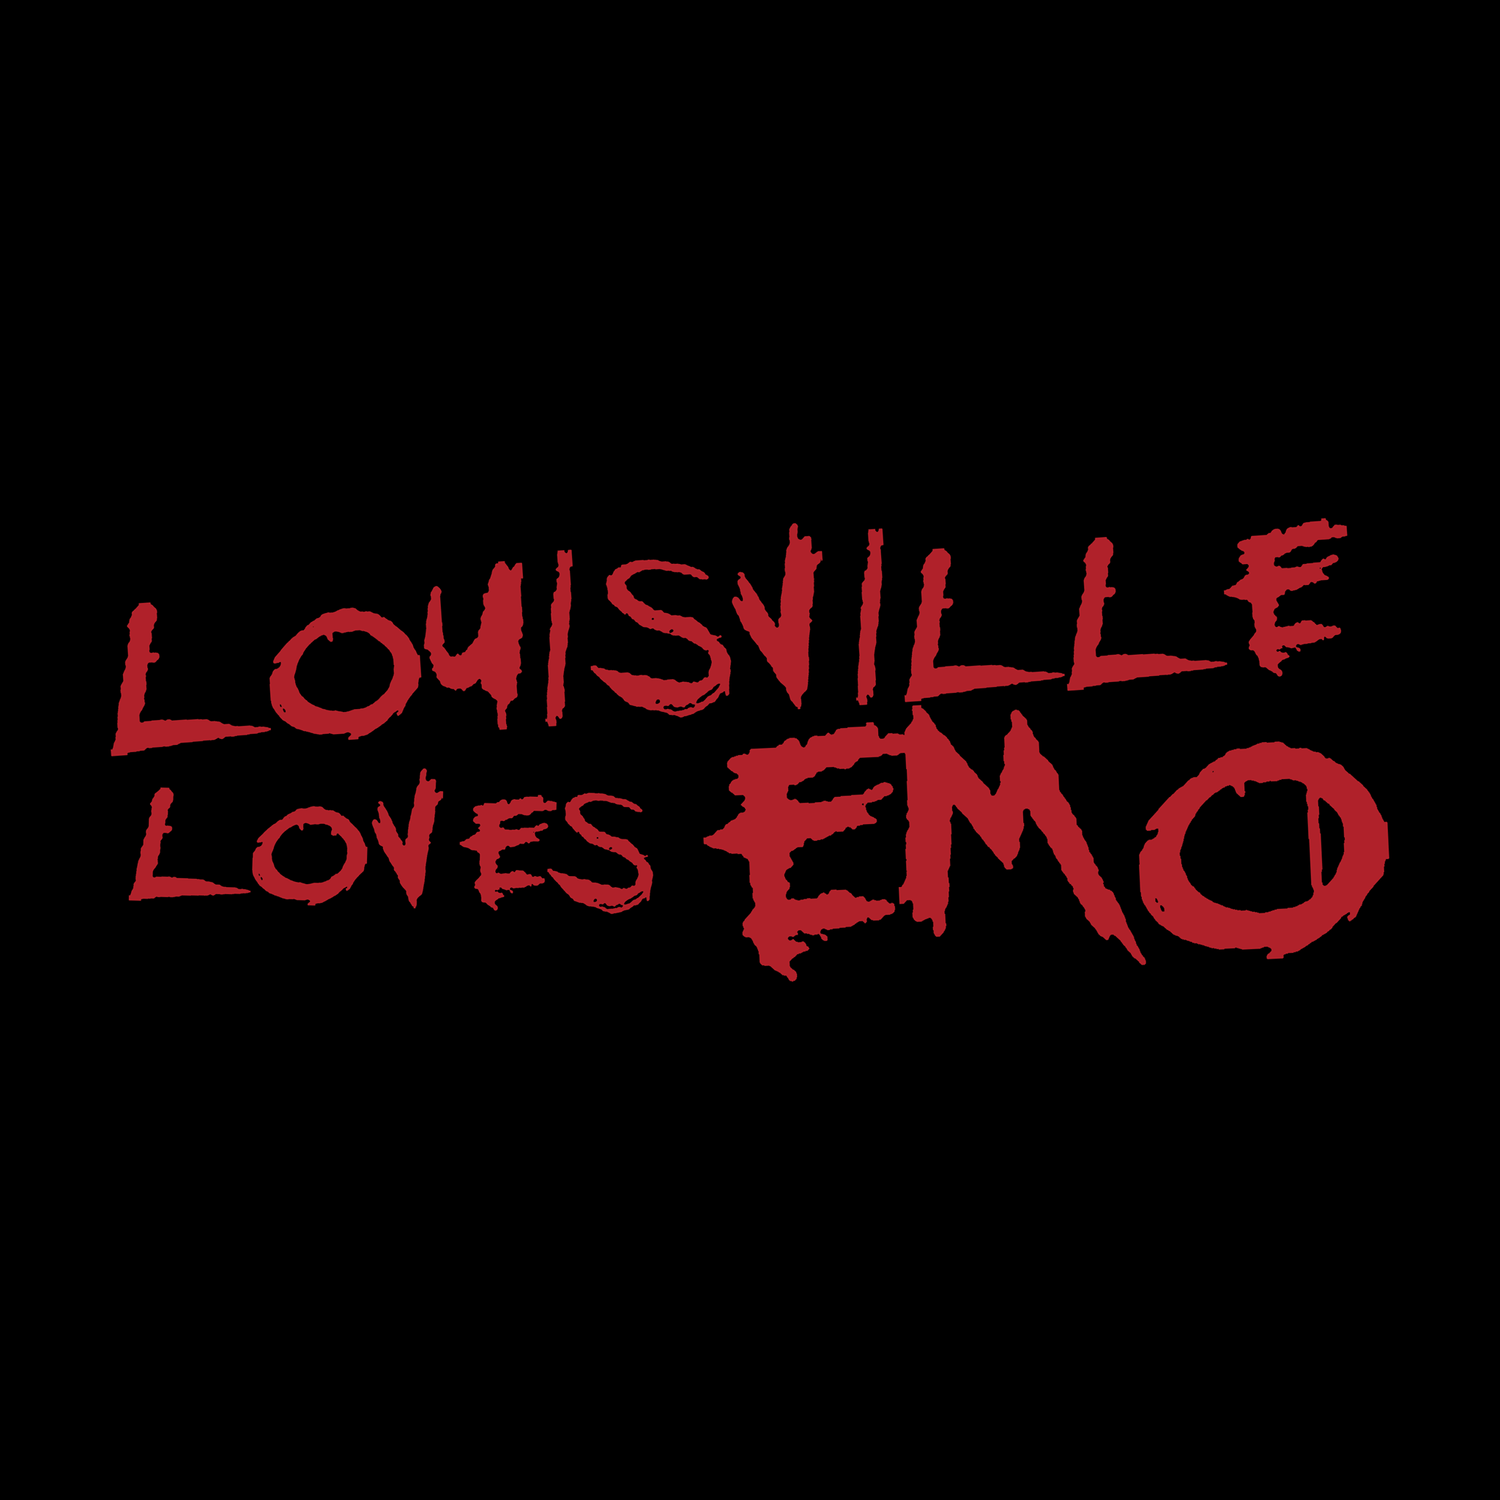 Episode 389: Who’s Tweeting ”Louisville Loves Emo with Zack and Brian”